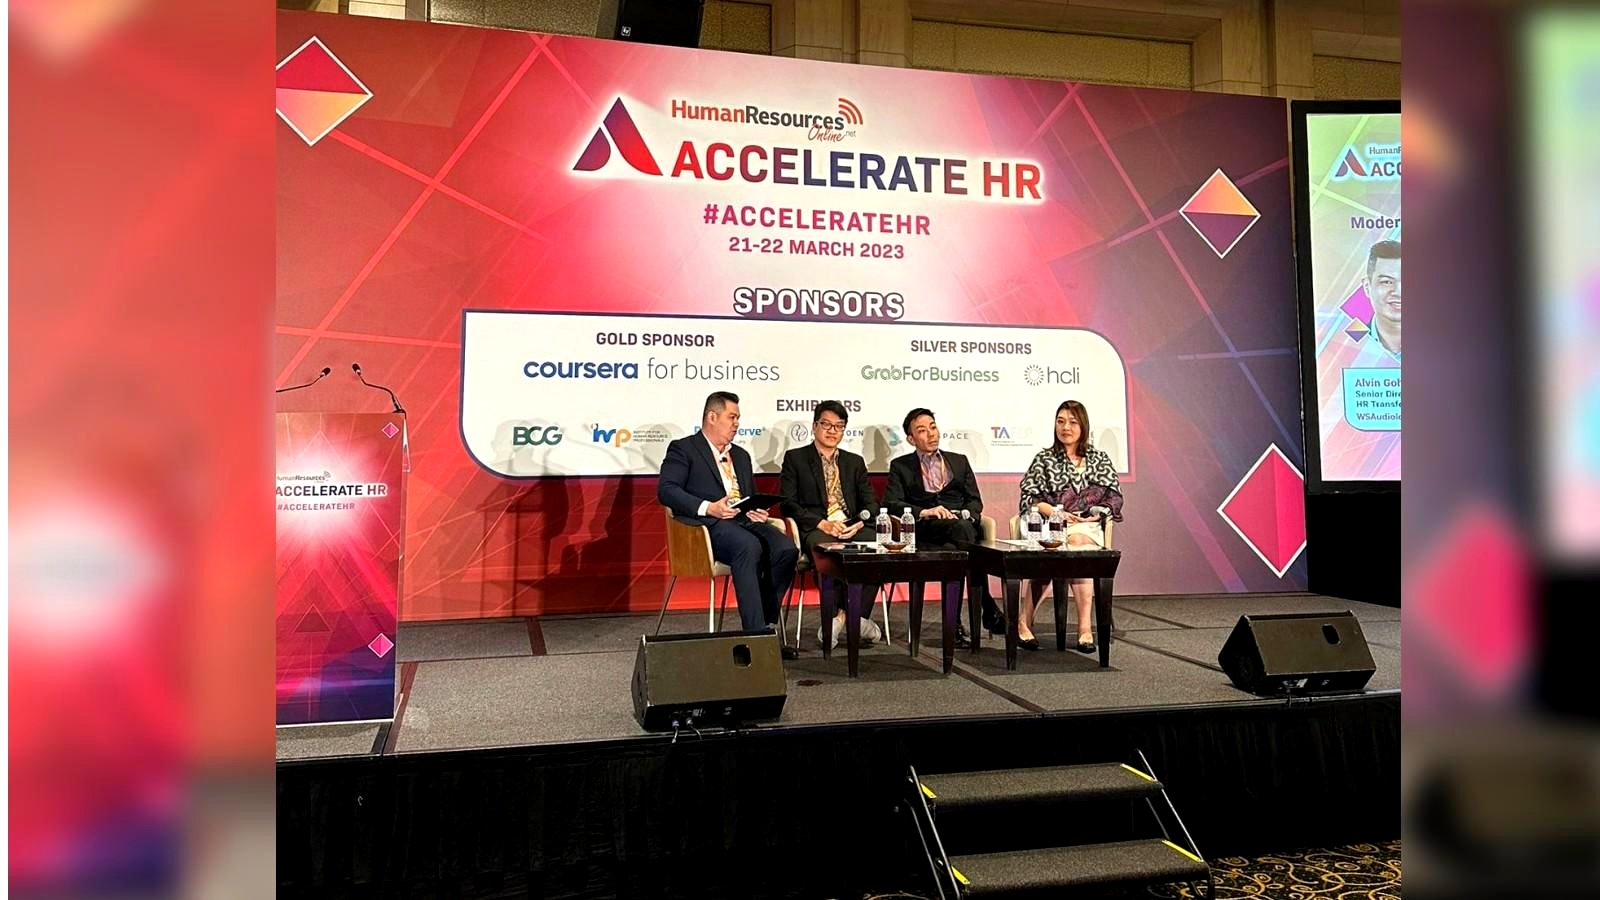 4 key HR tech & people analytics learnings from Accelerate HR 2023